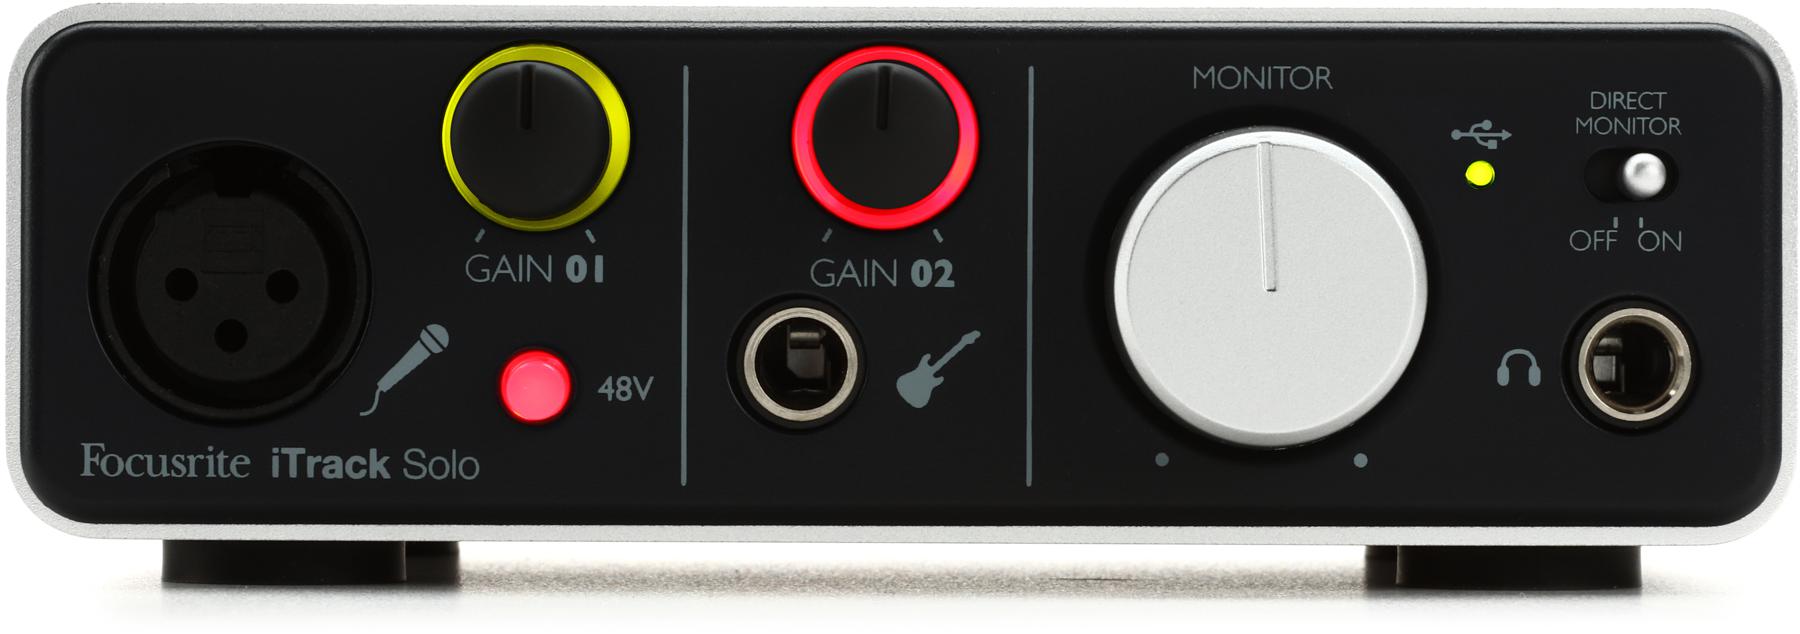 1. Focusrite Itrack Solo Lightning & USB Compatible Audio Interface